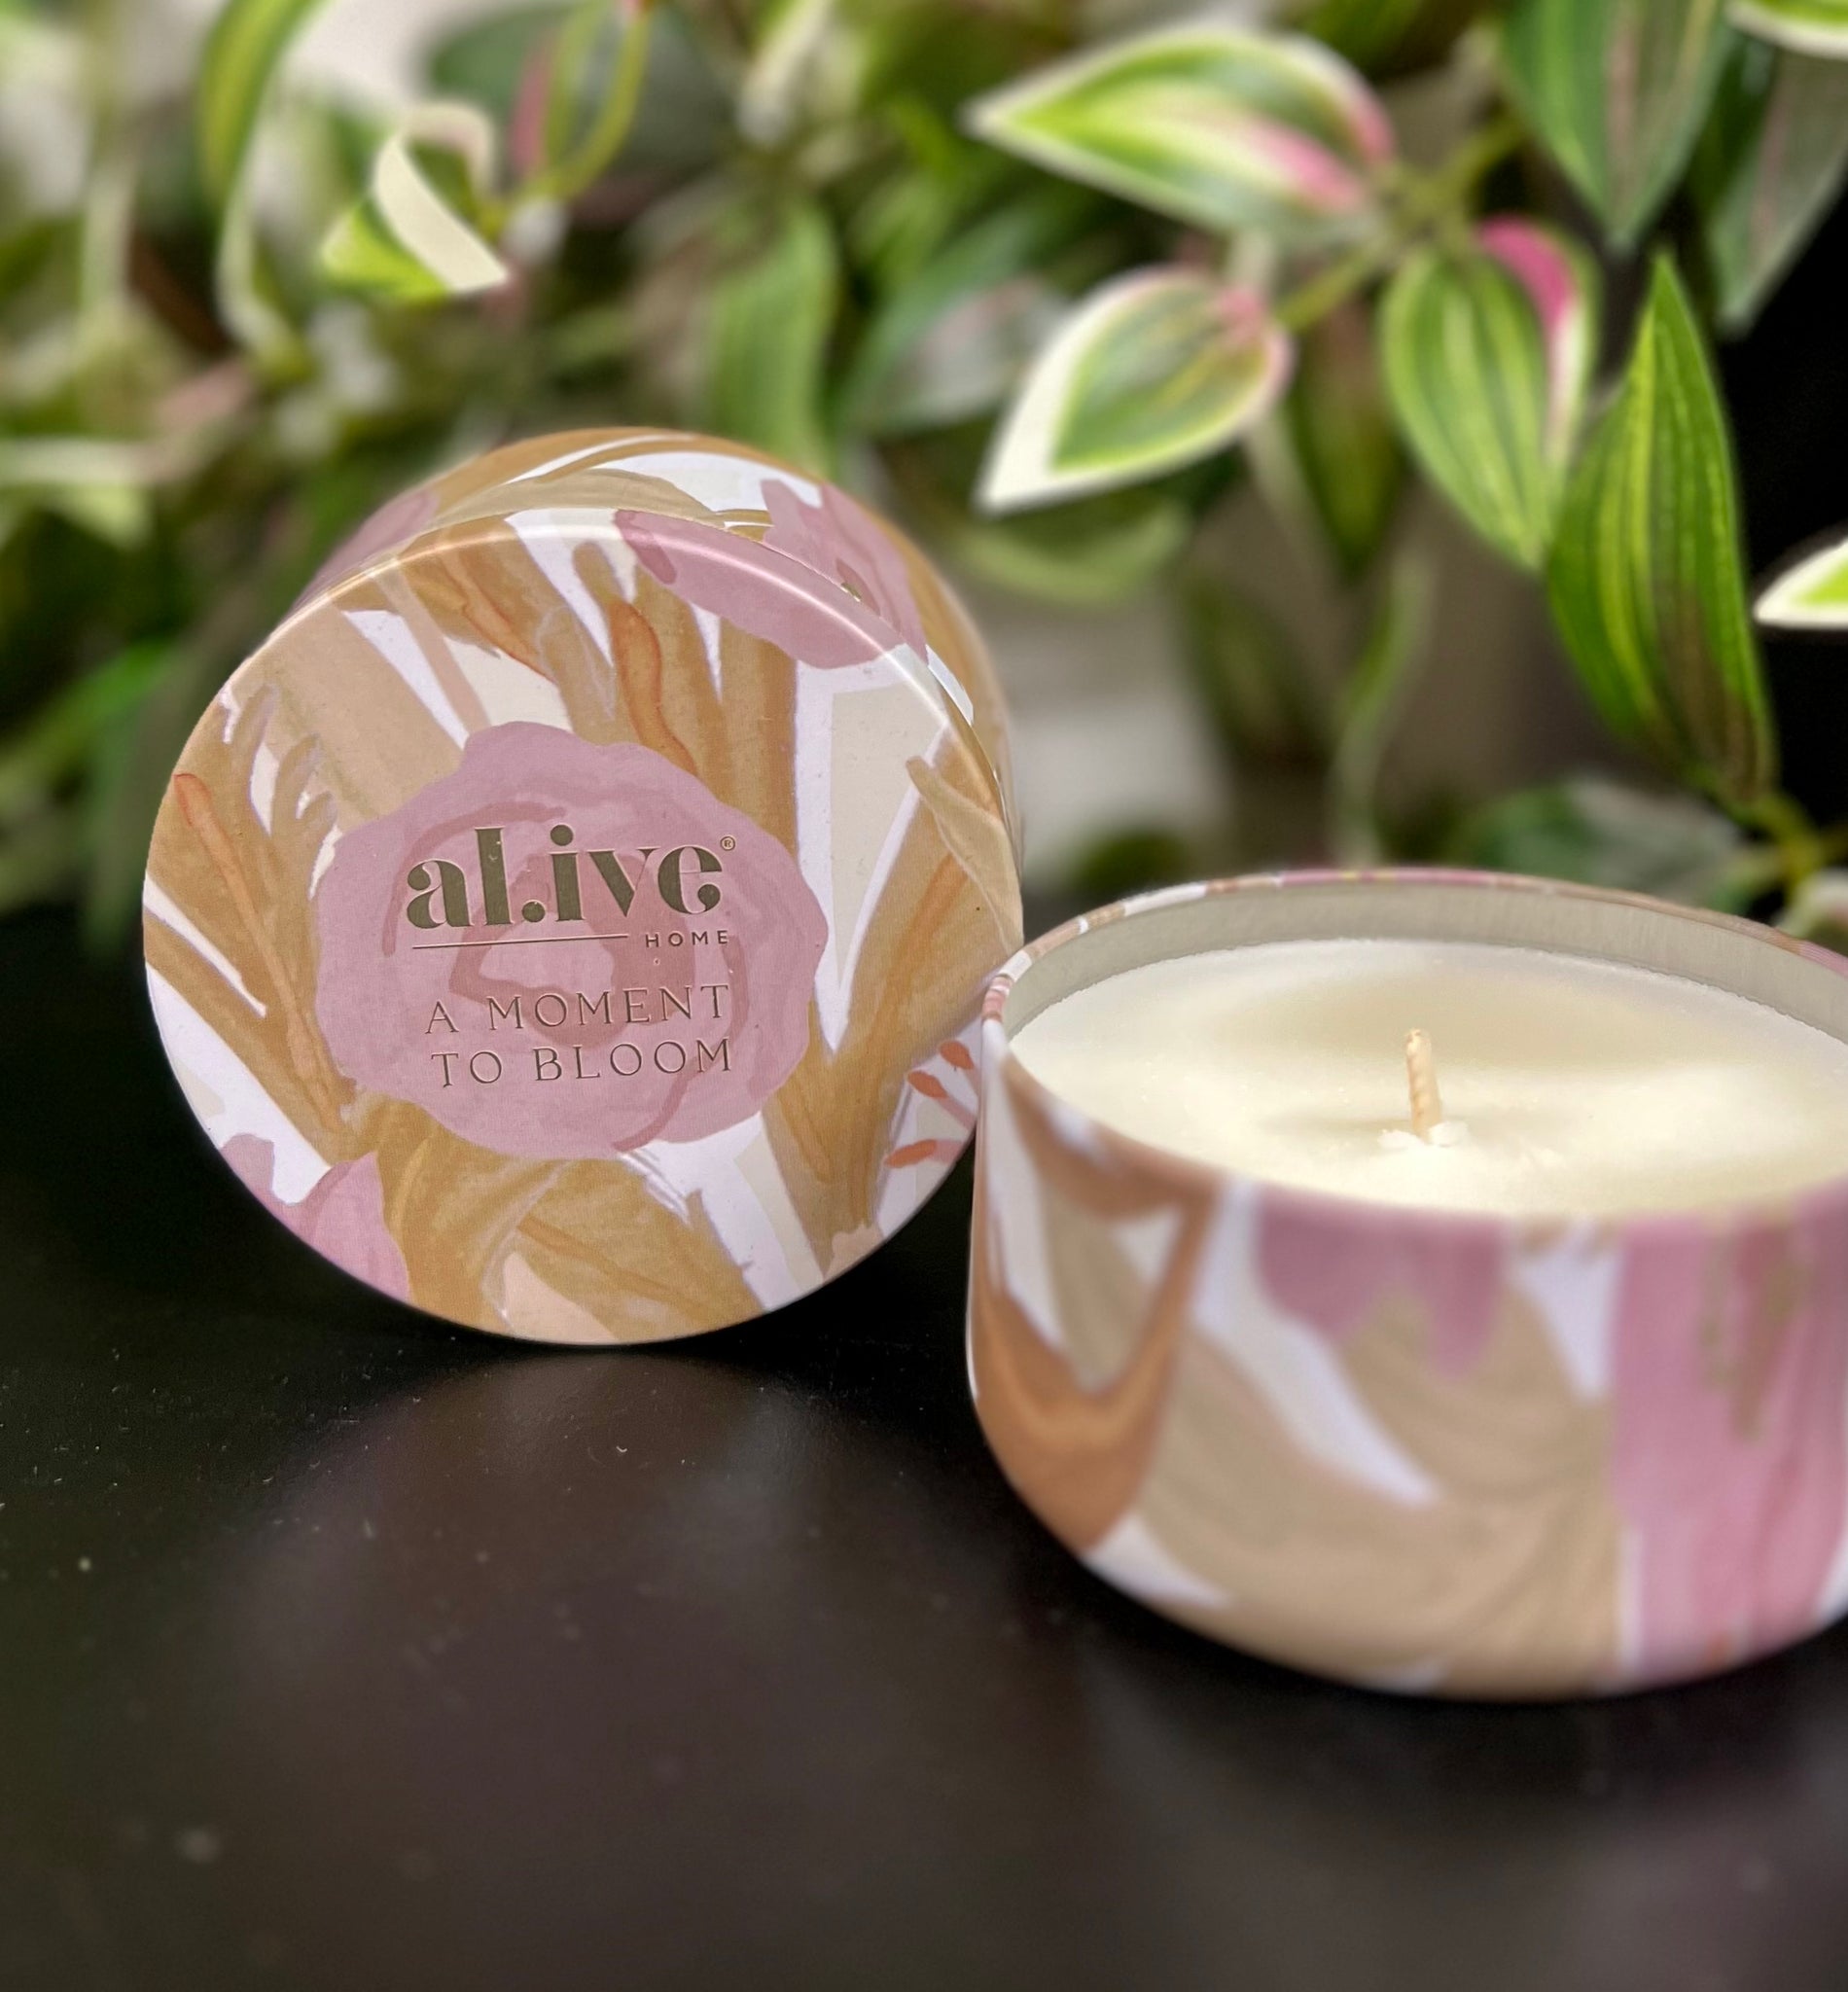 AL.IVE - MINI SOY CANDLE A MOMENT TO BLOOM